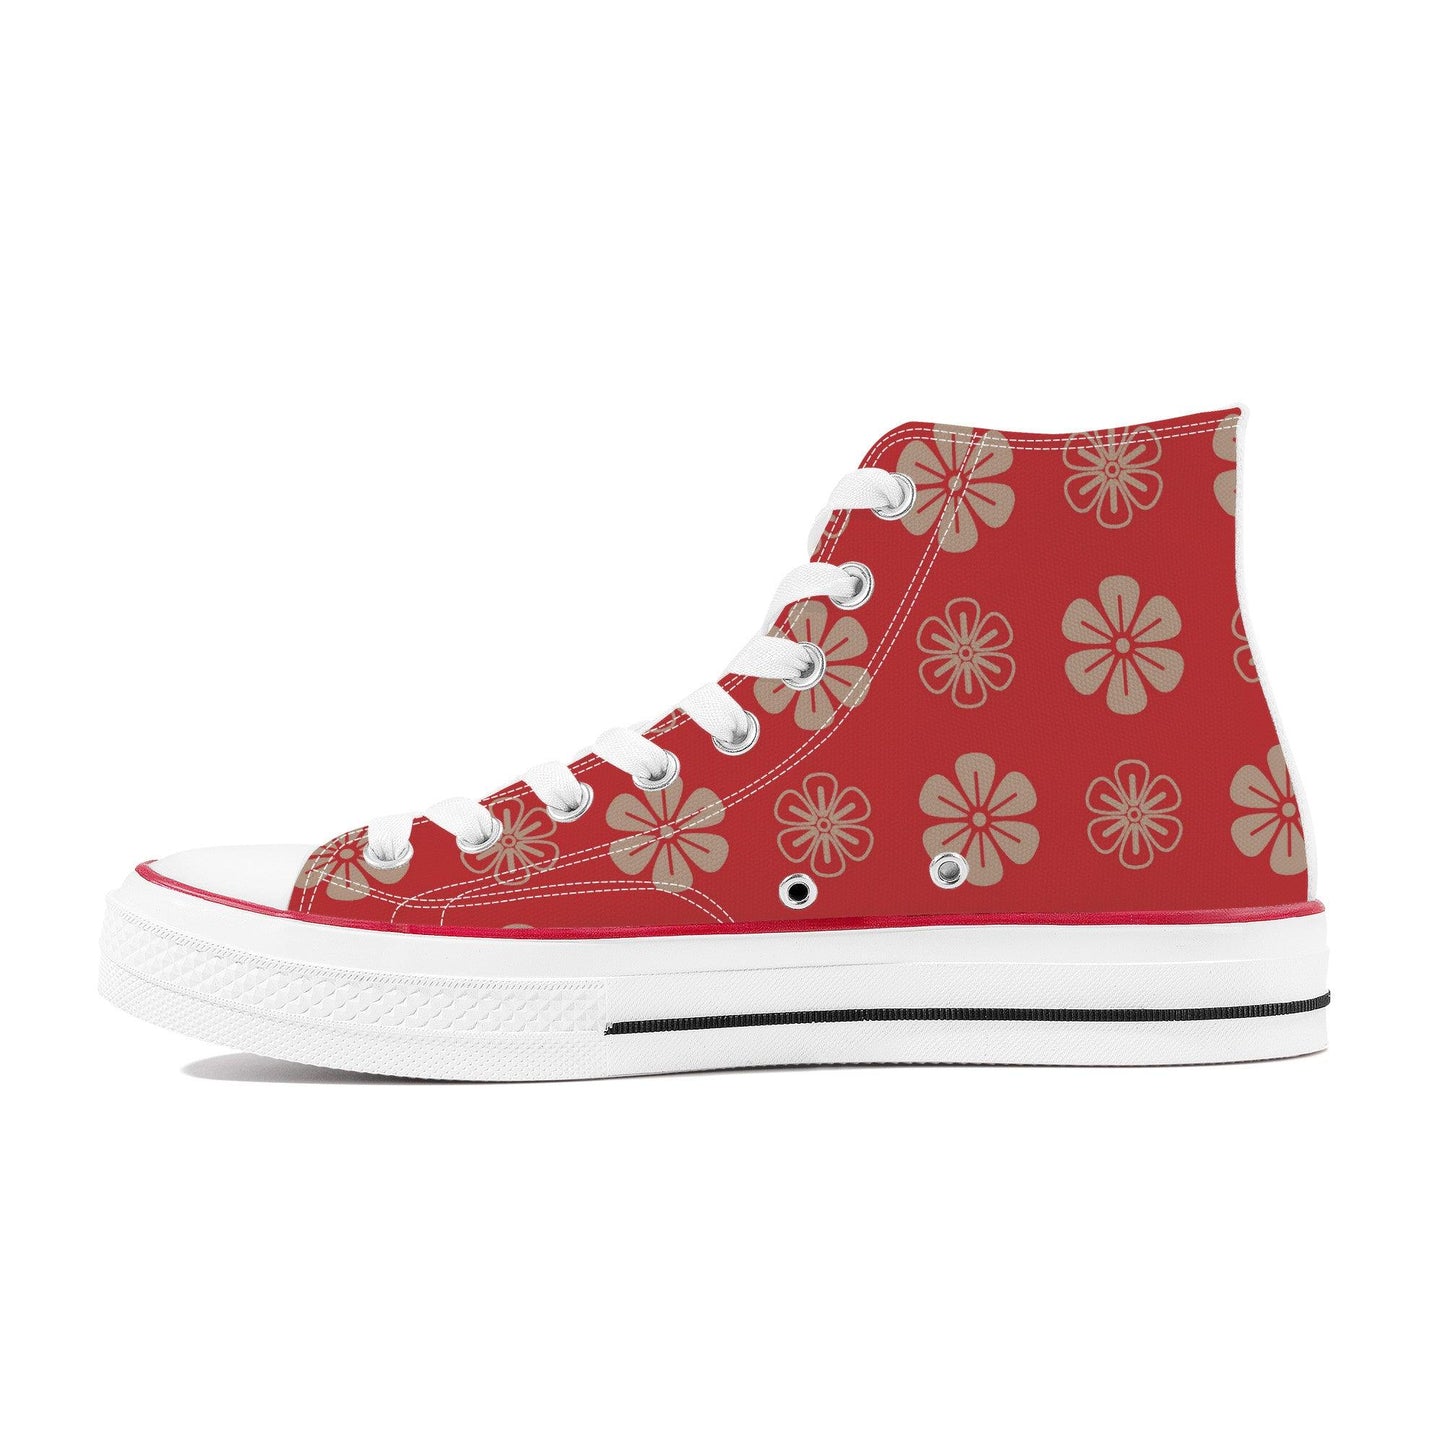 Aka 赤 - Red High Top Canvas Shoes - Kaito Japan Design 